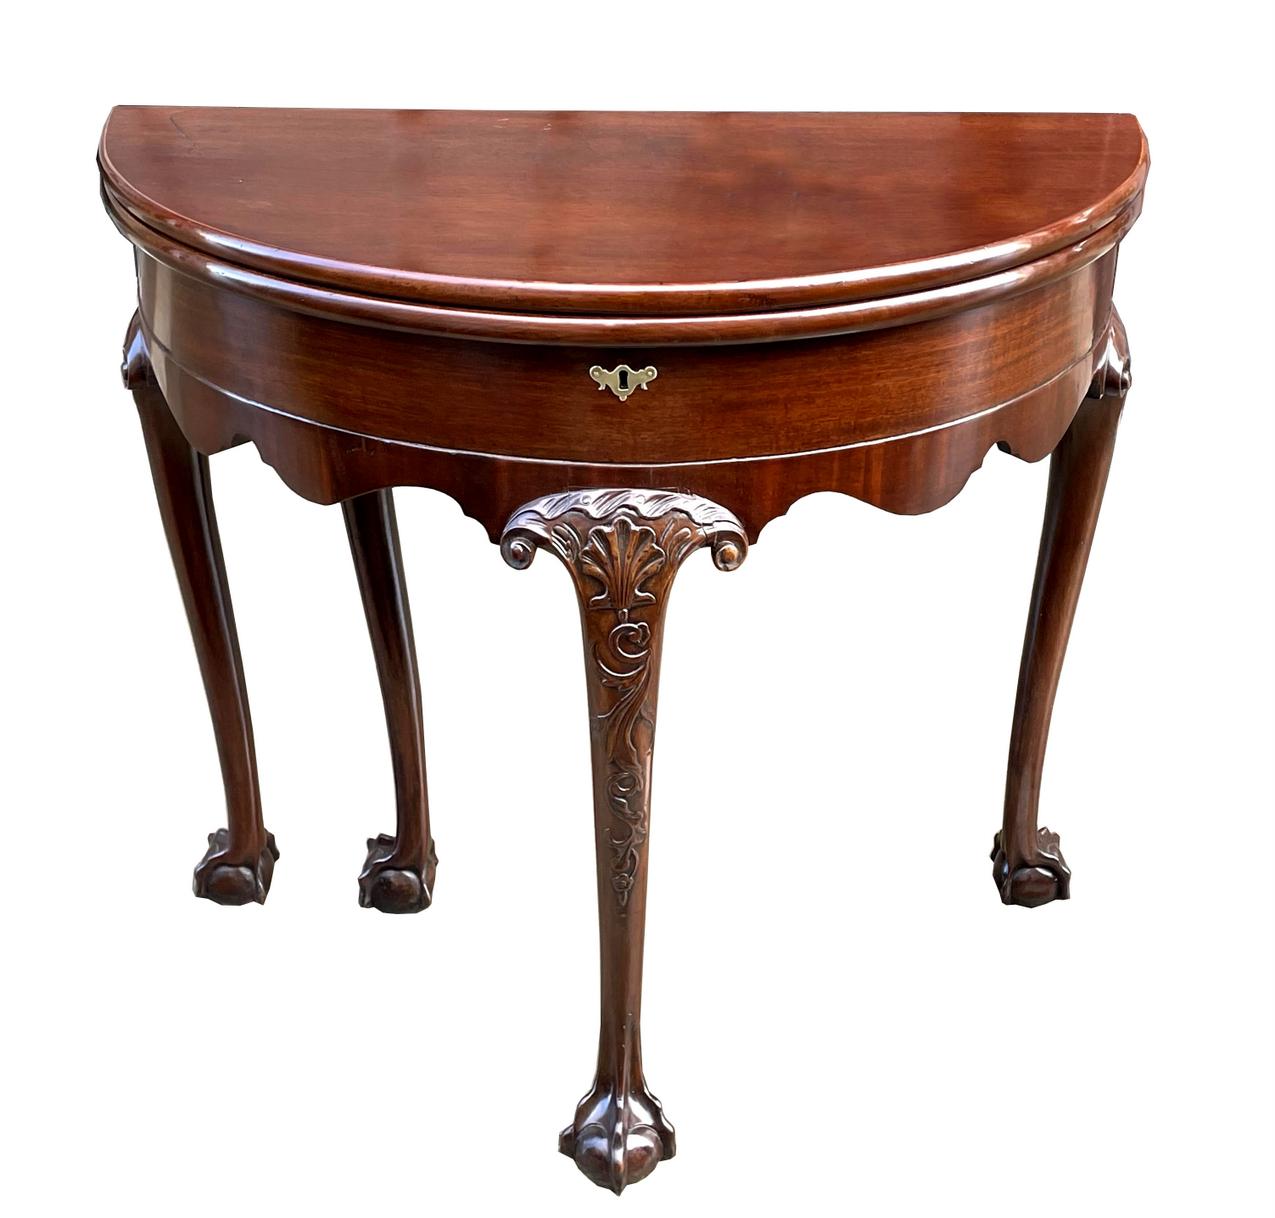 A superb example of an Early Irish Mahogany Georgian Demi-lune Fold-over Games Table of outstanding museum quality. Made in Ireland during the last quarter of the Eighteenth Century. 

The double hinged surface panel opening to reveal a dark